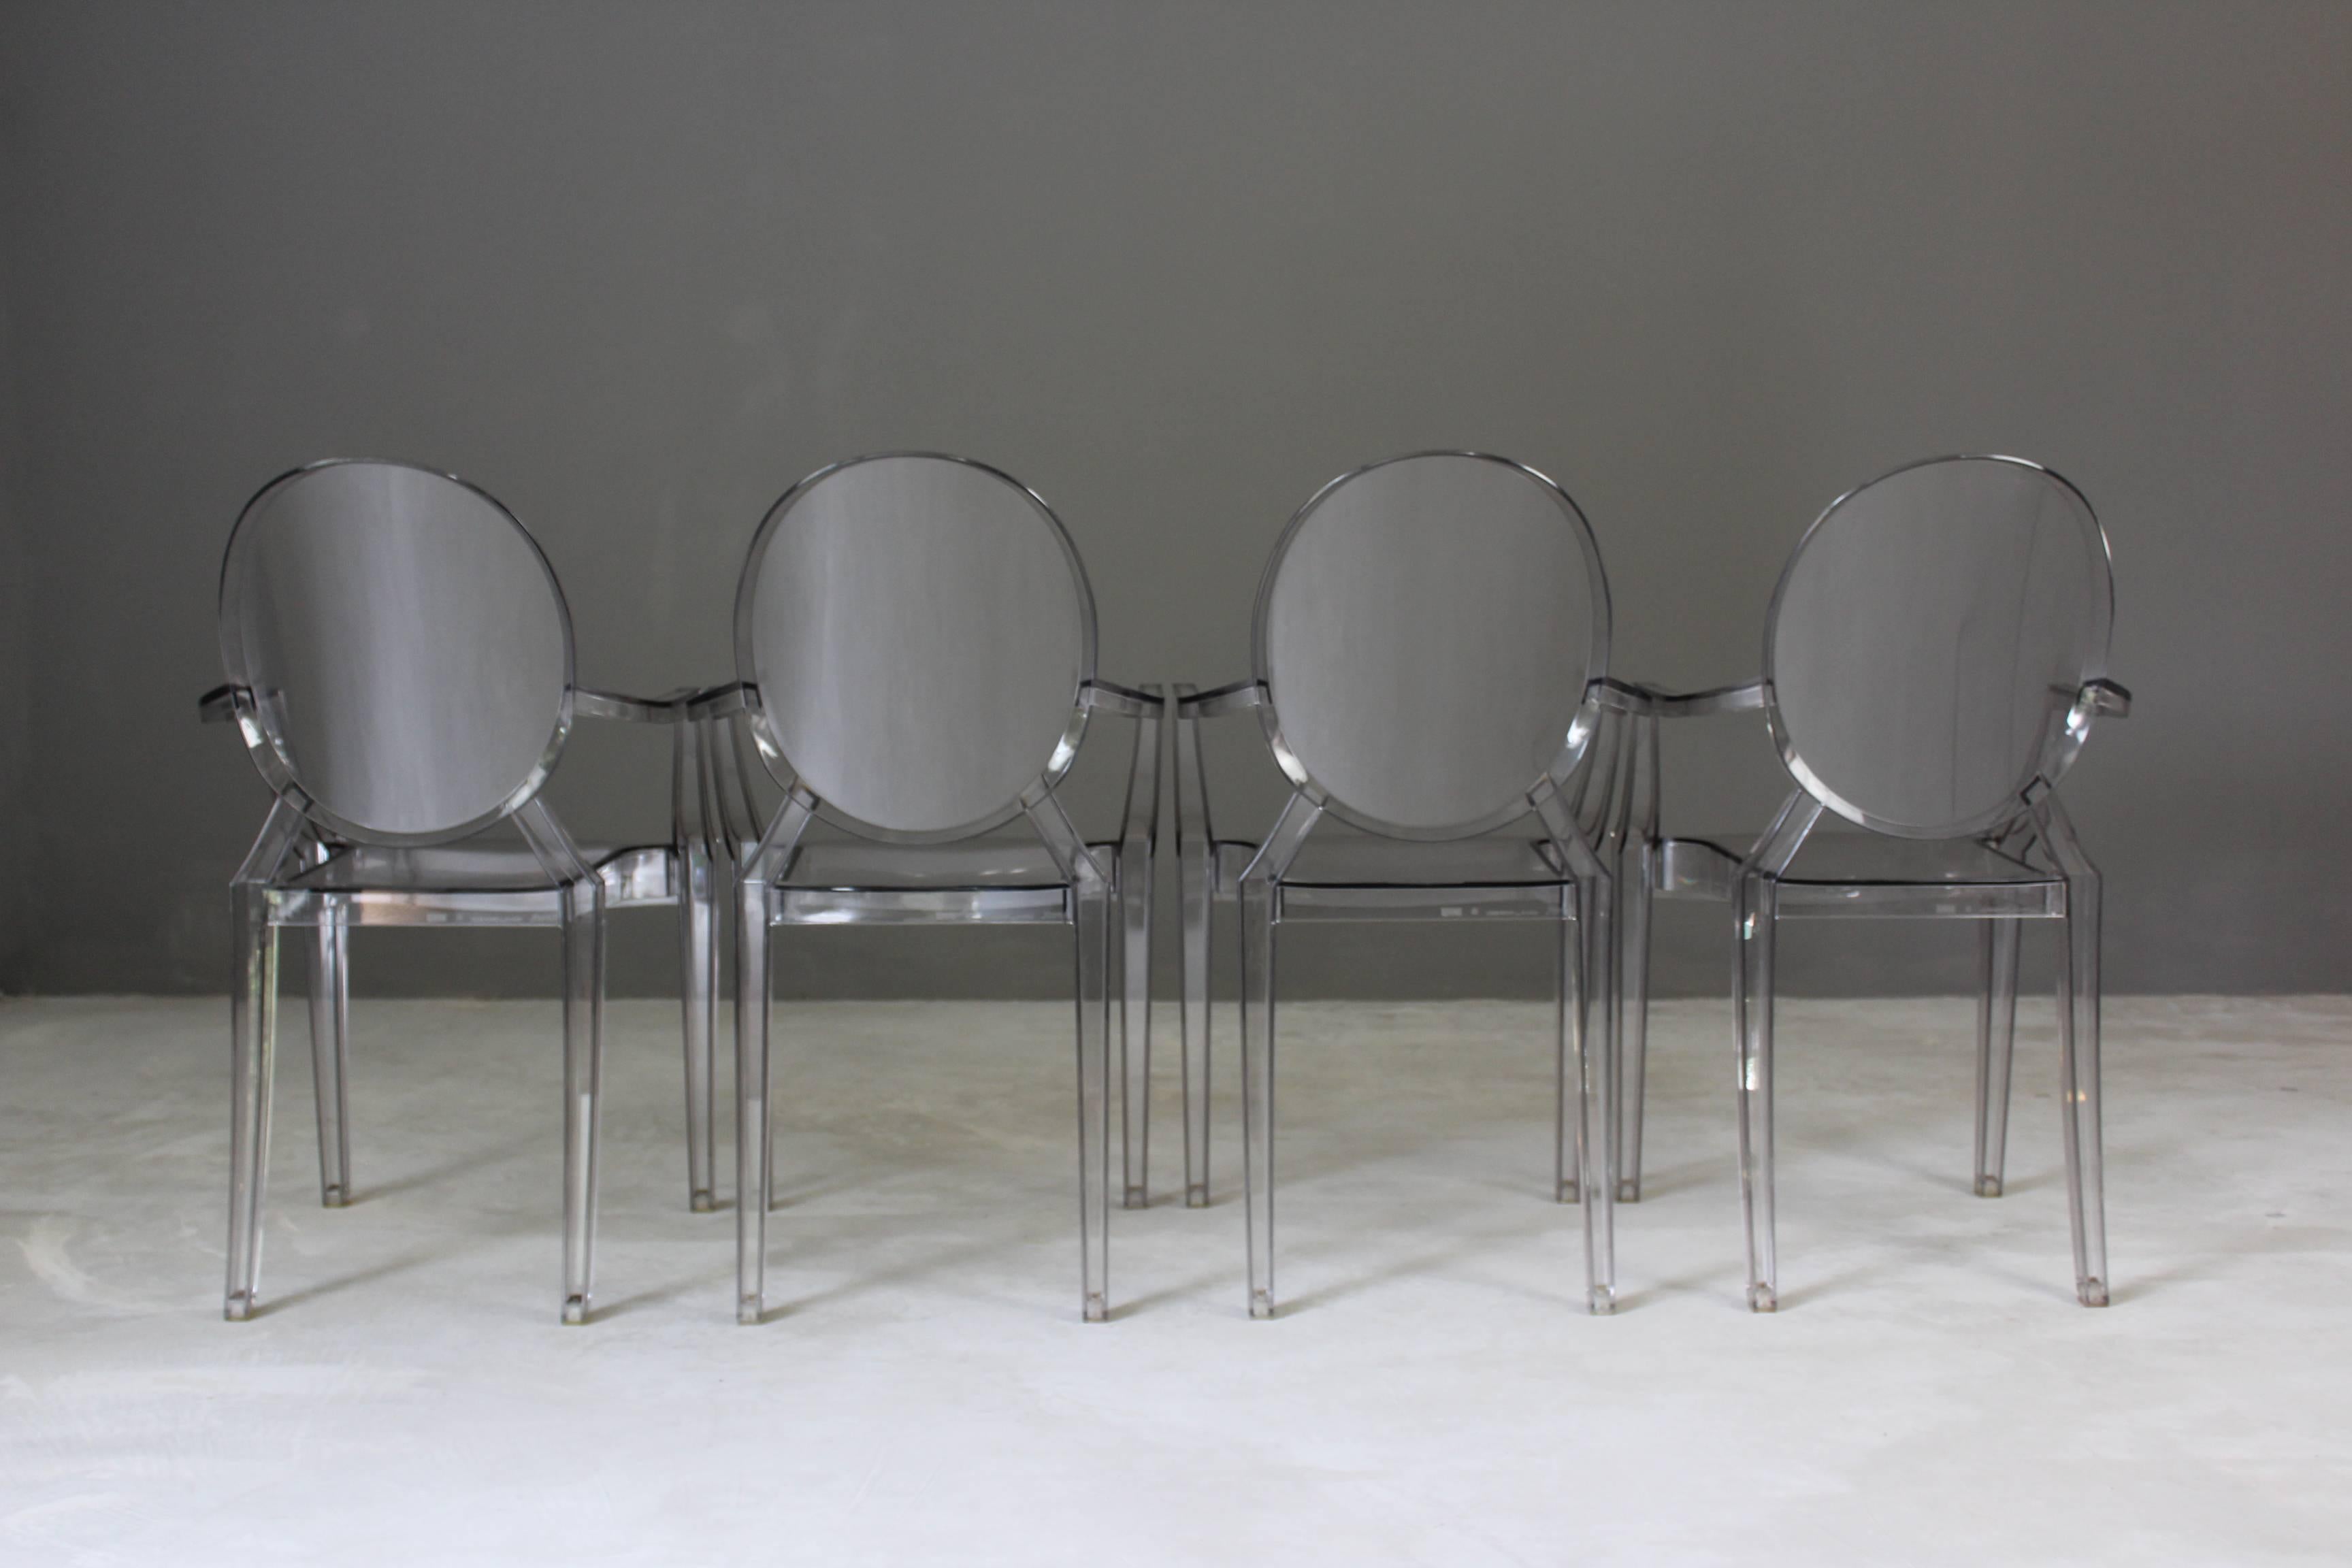 Four Kartell ghost chairs. Set of four smoke tinted arcylic Philippe Starck - Louis Ghost chairs made by Kartell with the stamp to the rear of the seat.

Dimensions: W 54 x H 94 x Depth 55 cm - H seat 47 cm.

Please click our logo for more